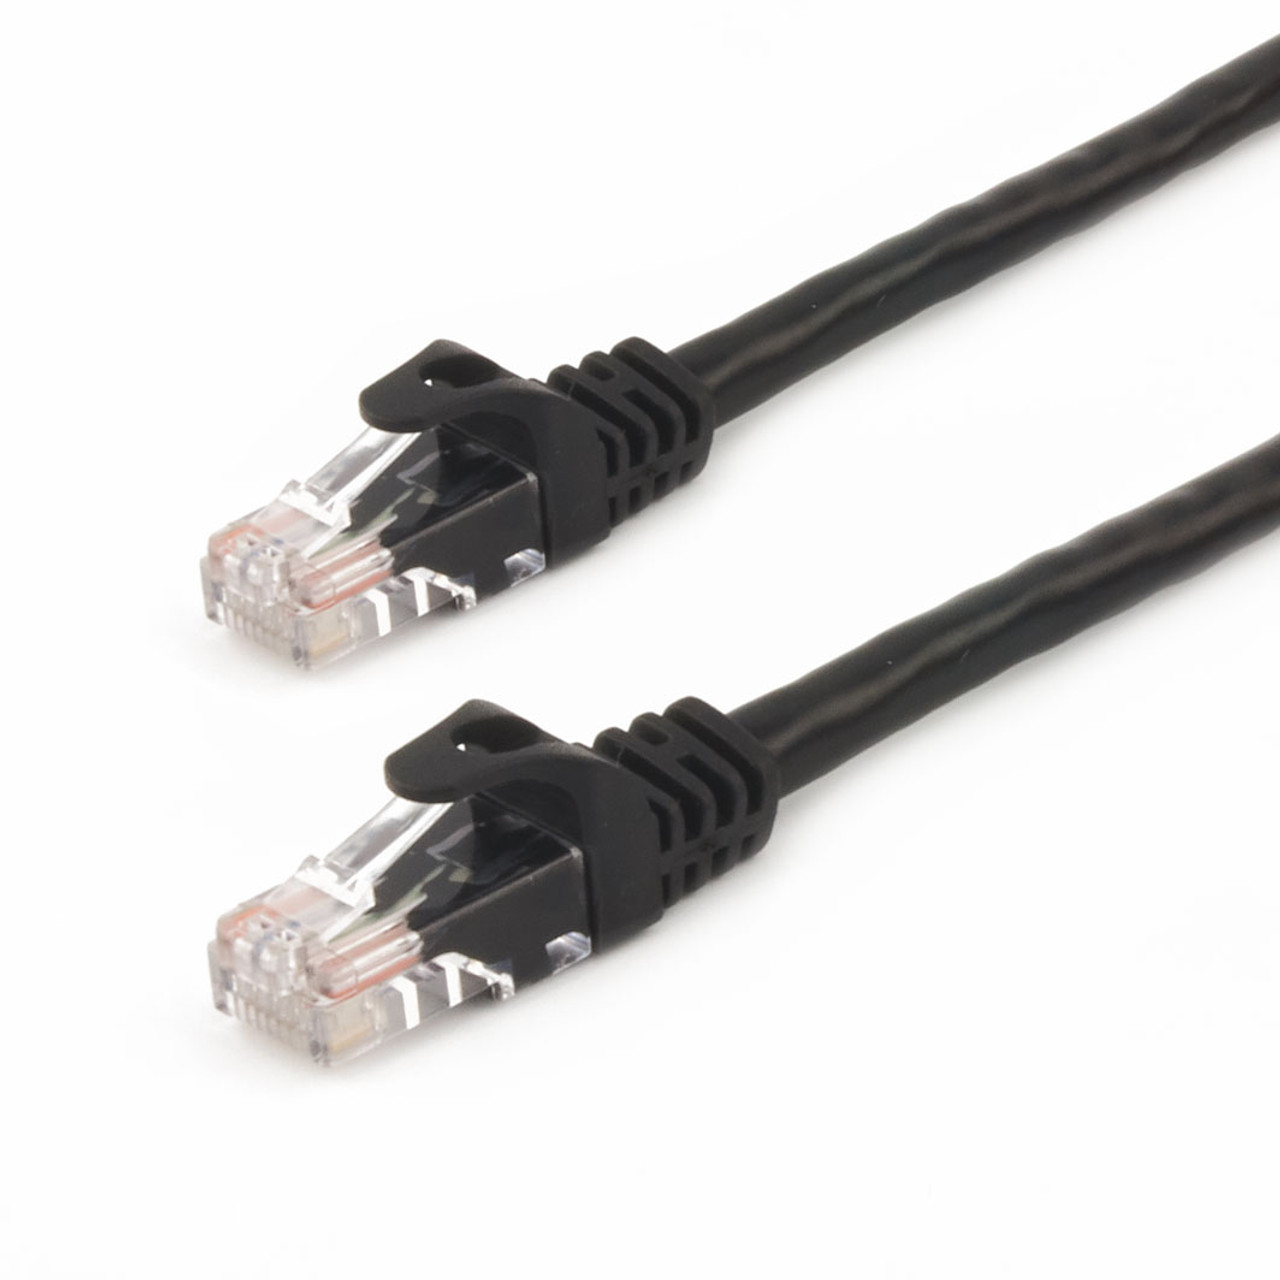 Cat6 Ethernet Patch Cable Snagless RJ45 24awg 30ft